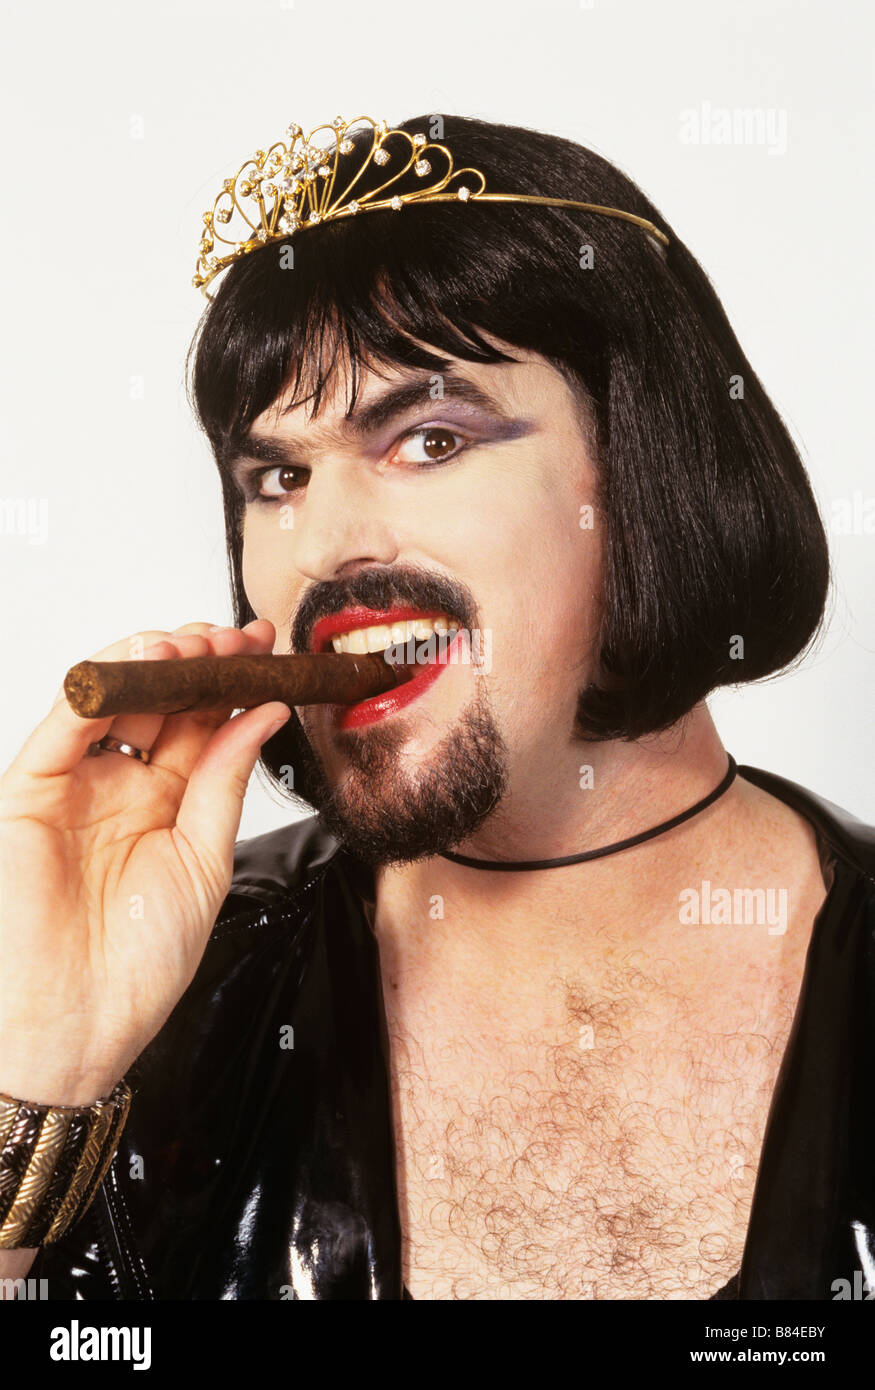 Drag queen with beard and cigar, wearing tiara Stock Photo